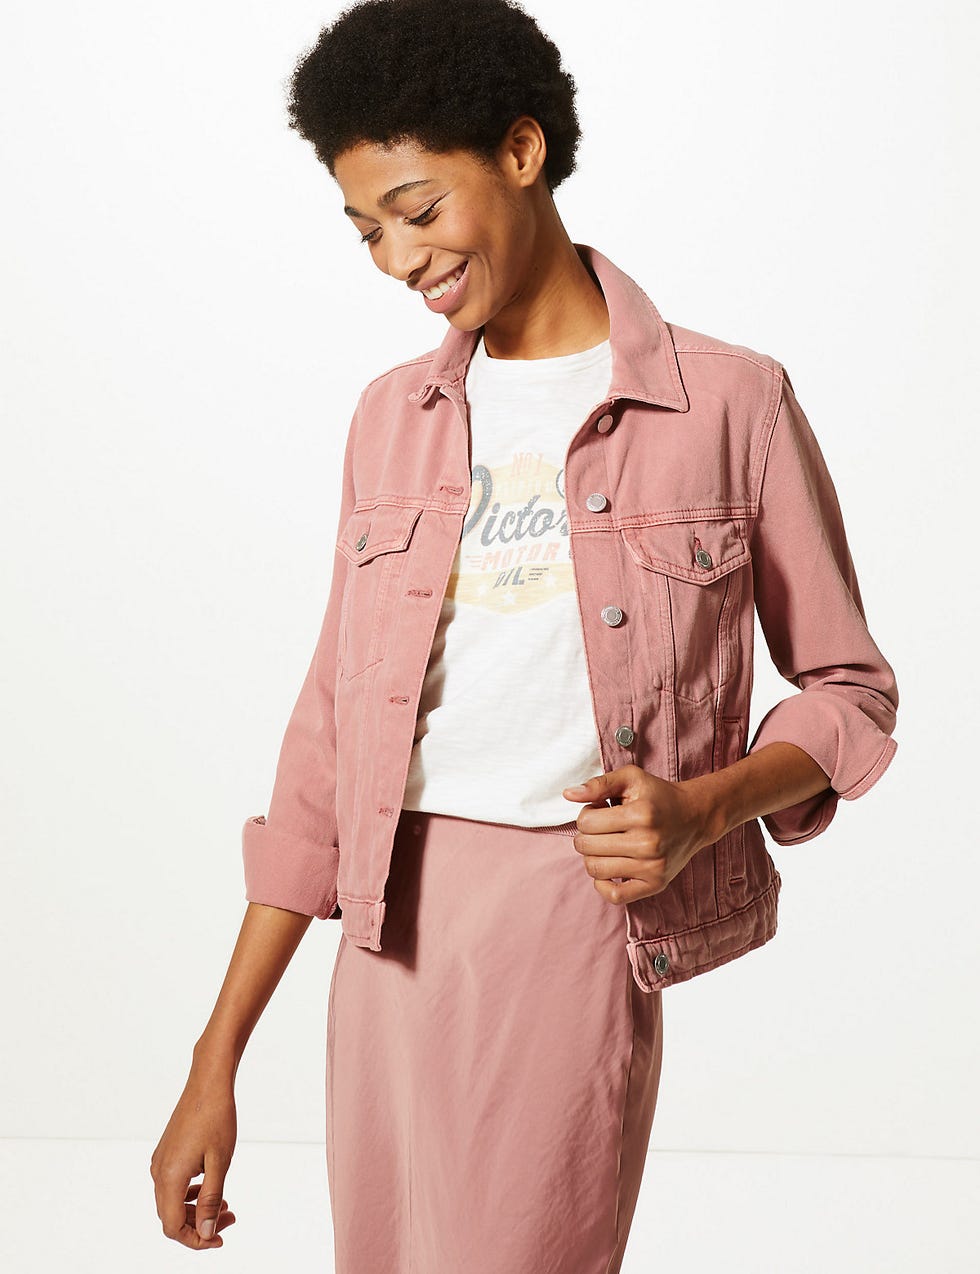 11 stylish denim jackets for summer 2023: From M&S to ASOS, Levi's